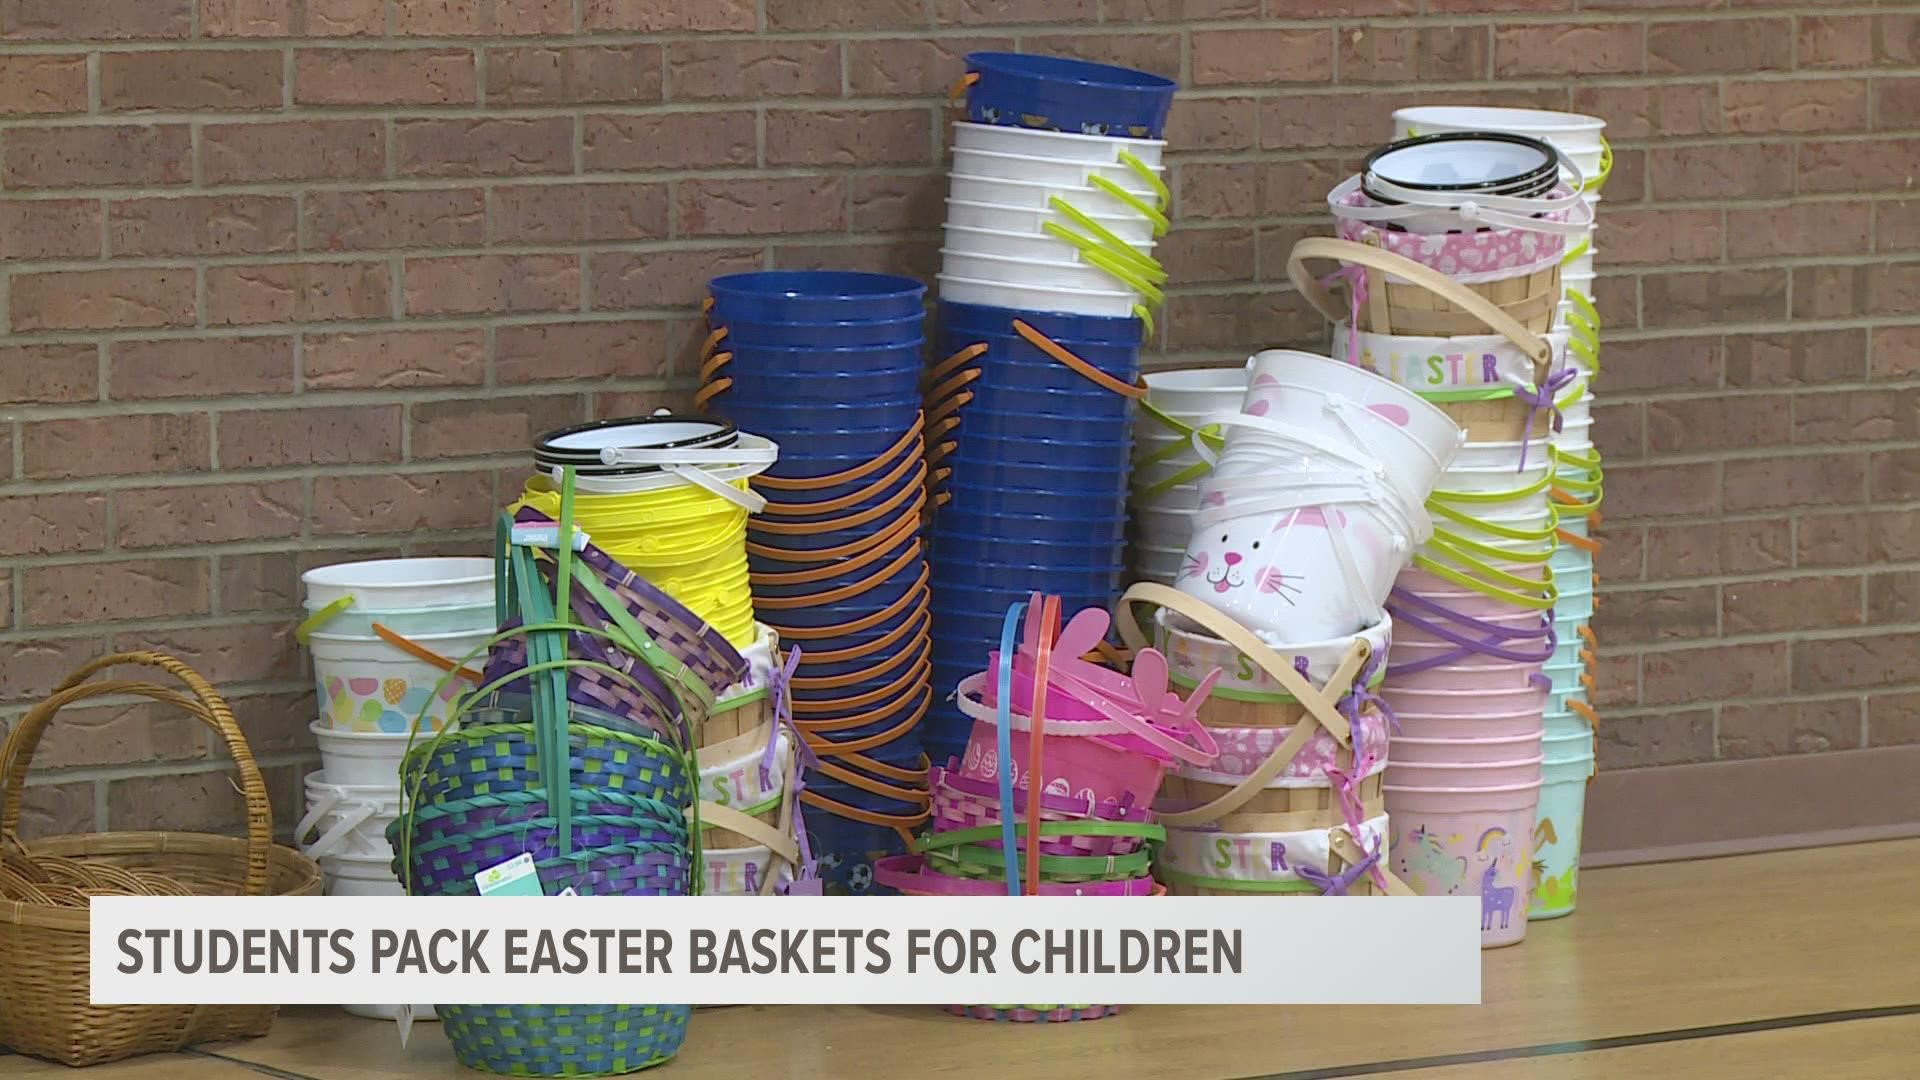 Making Easter baskets for children who might not normally get them is an annual tradition for St. Paul the Apostle School.